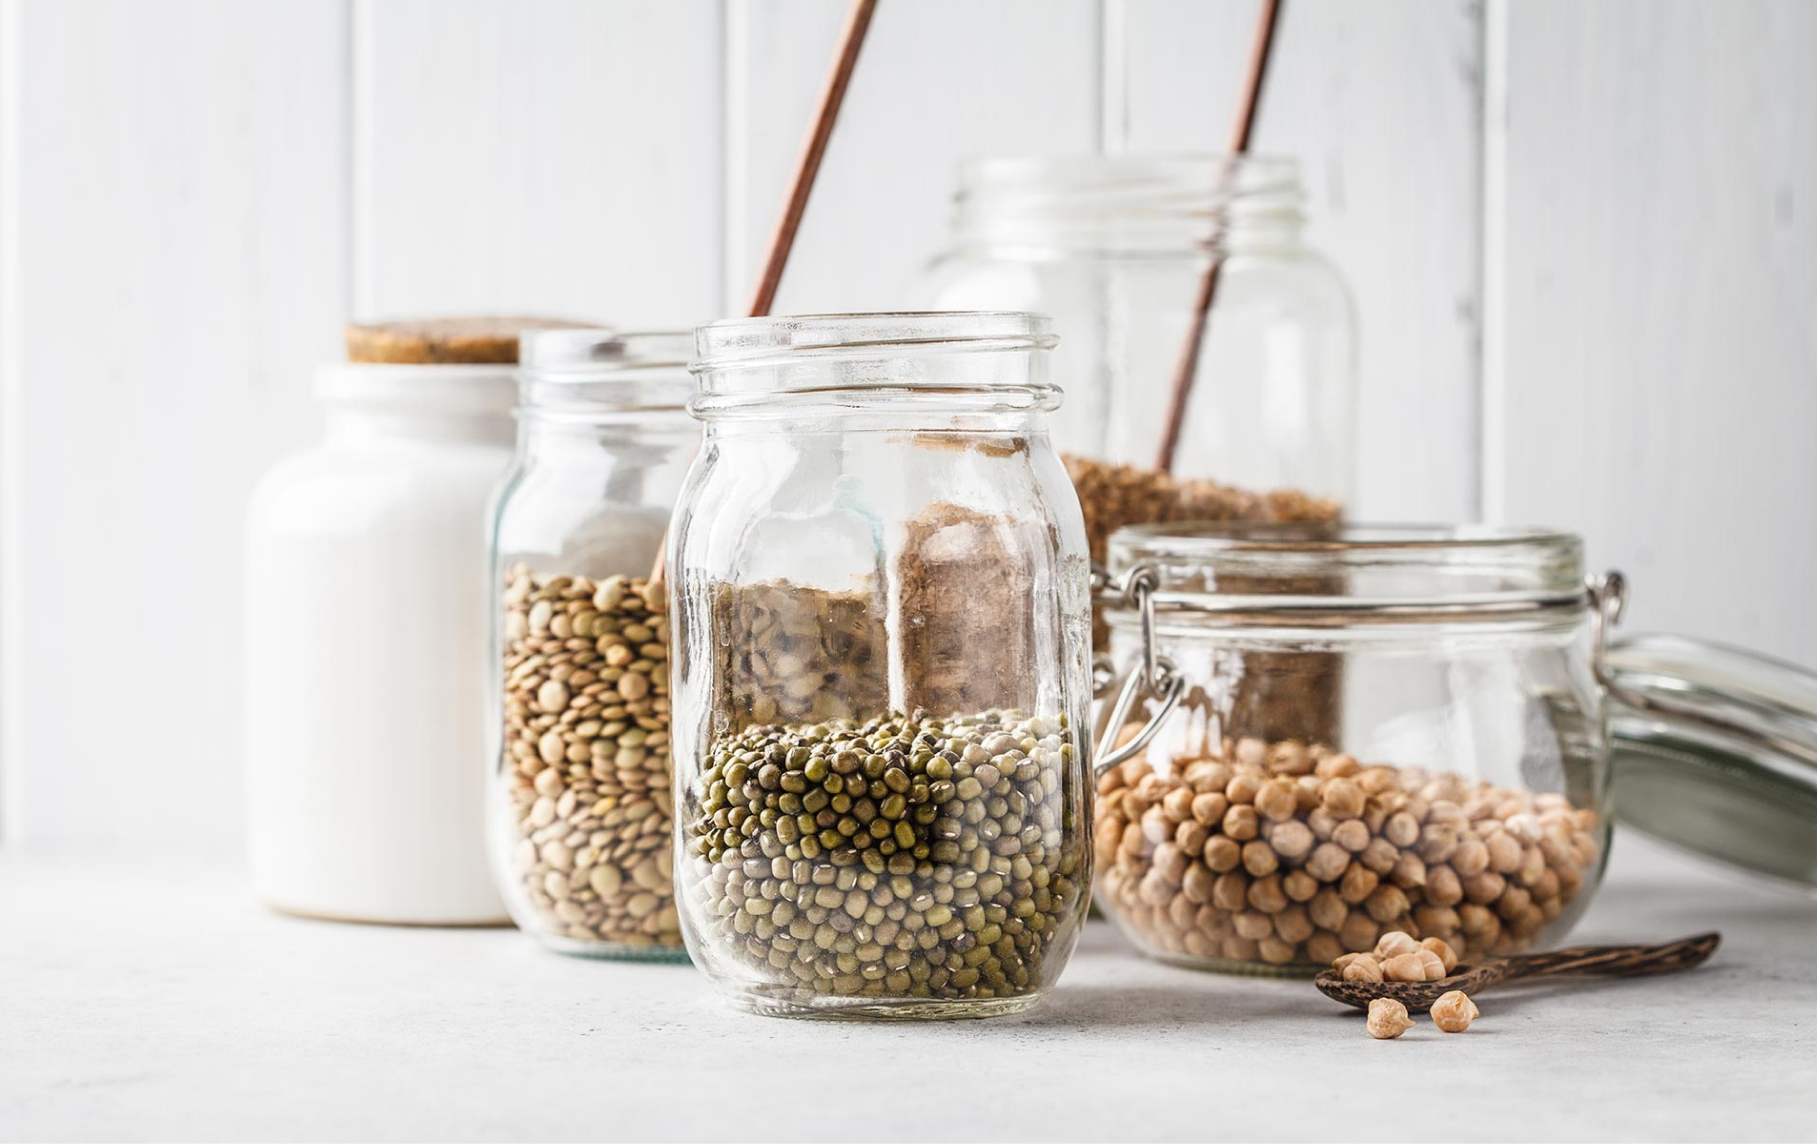 An image showing dried goods including peas and garbanzo beans in glass jars.